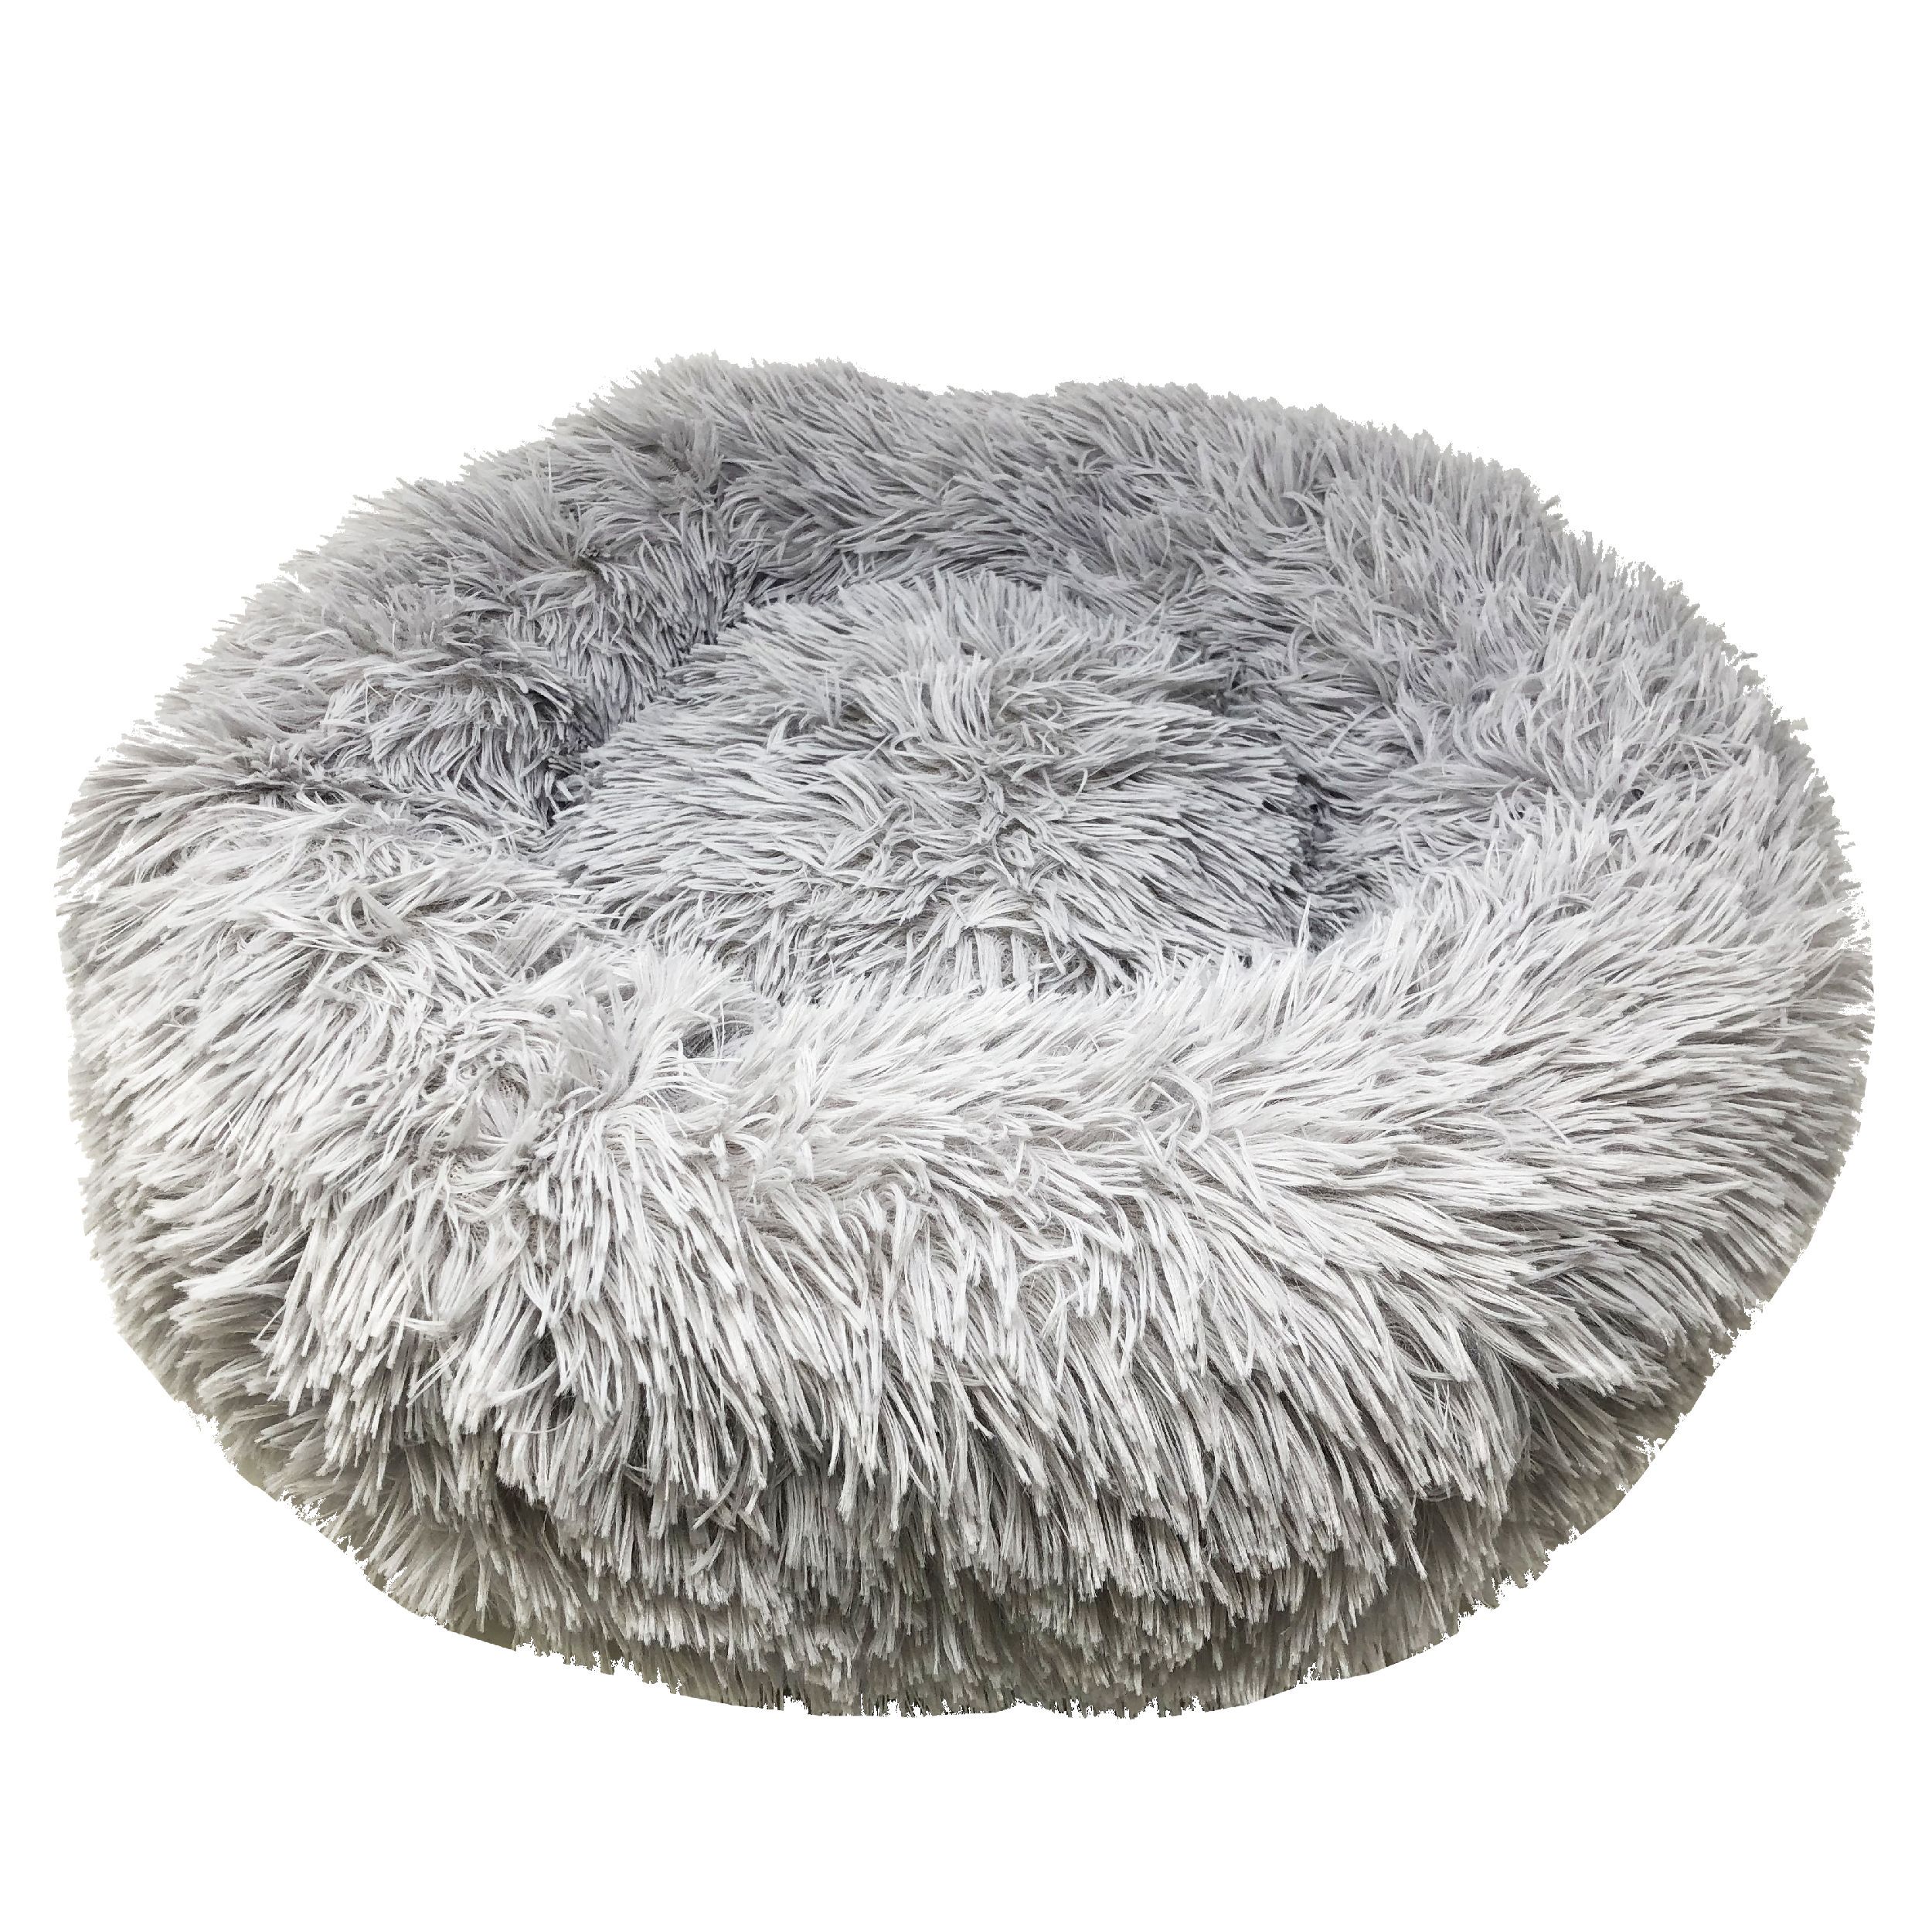 Pet Life ® 'Nestler' High-Grade Plush and Soft Rounded Pet Bed  